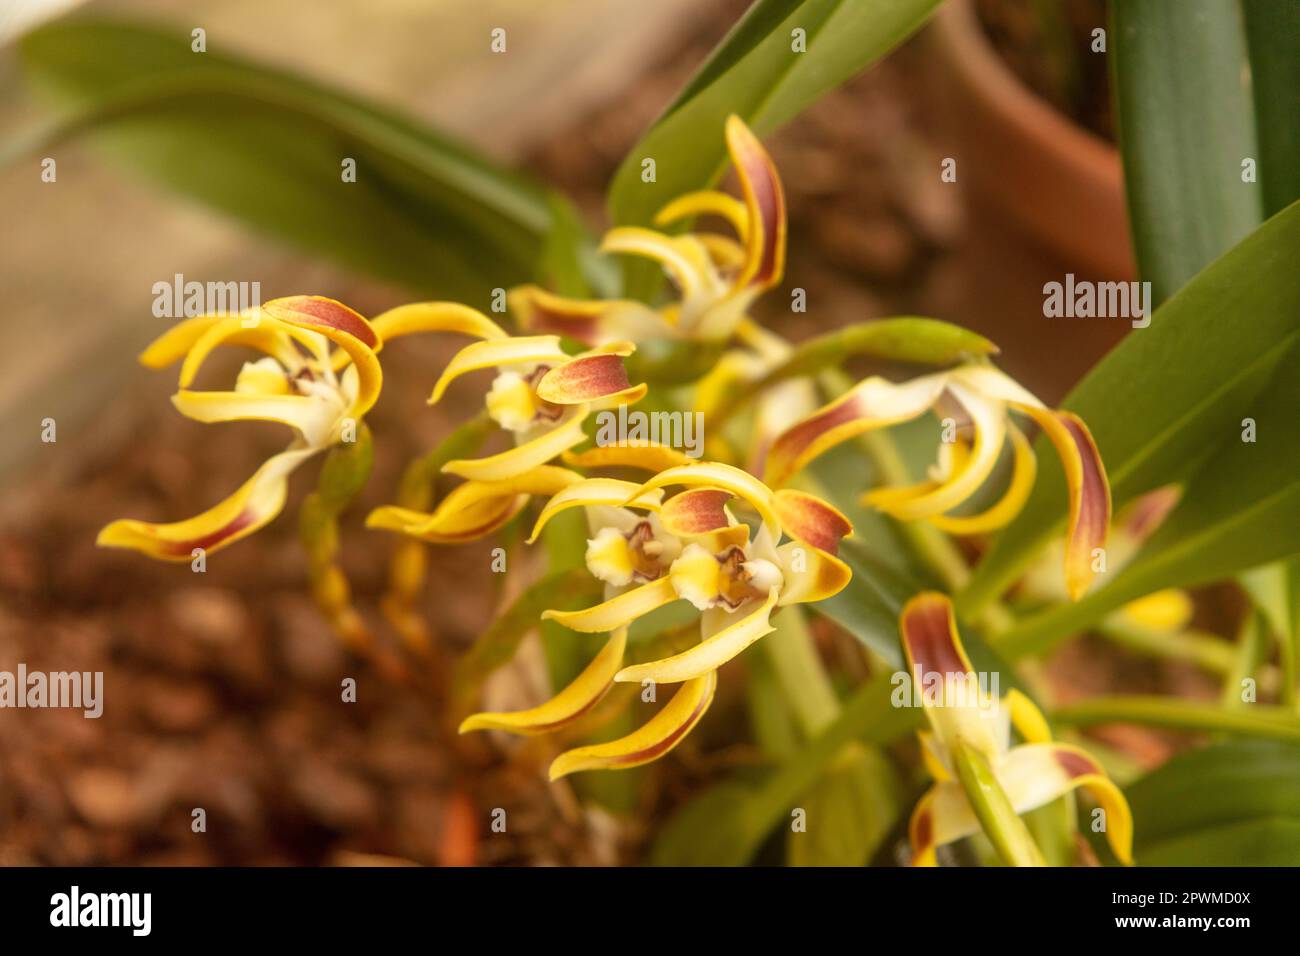 Interesting Maxillaria Luteoalba (Orchid) in flower,. Natural close up flowering plant portrait Stock Photo